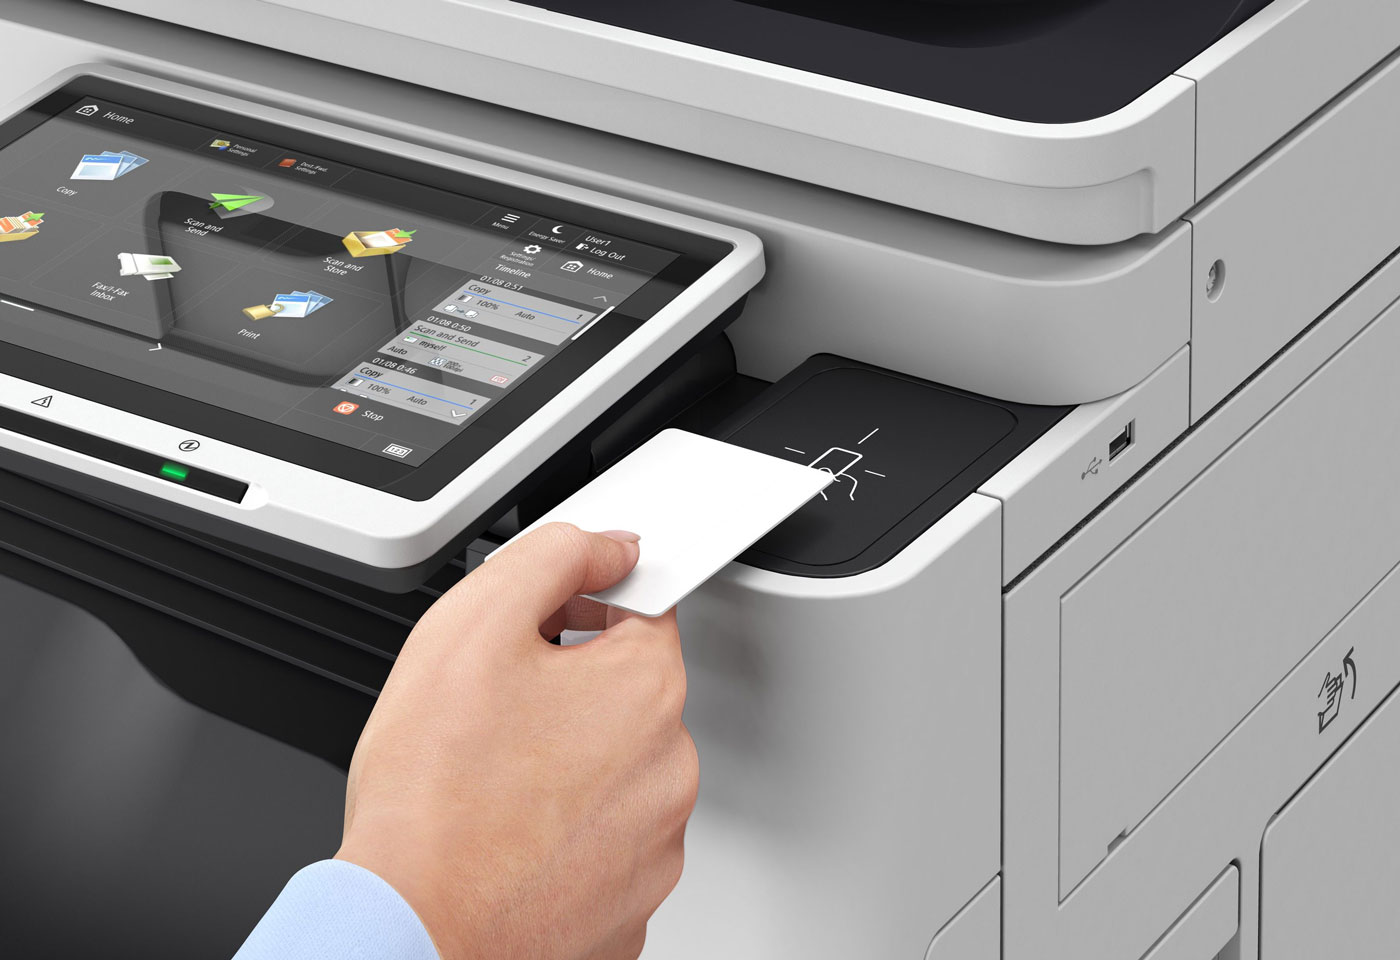 Secure printers to safeguard your business